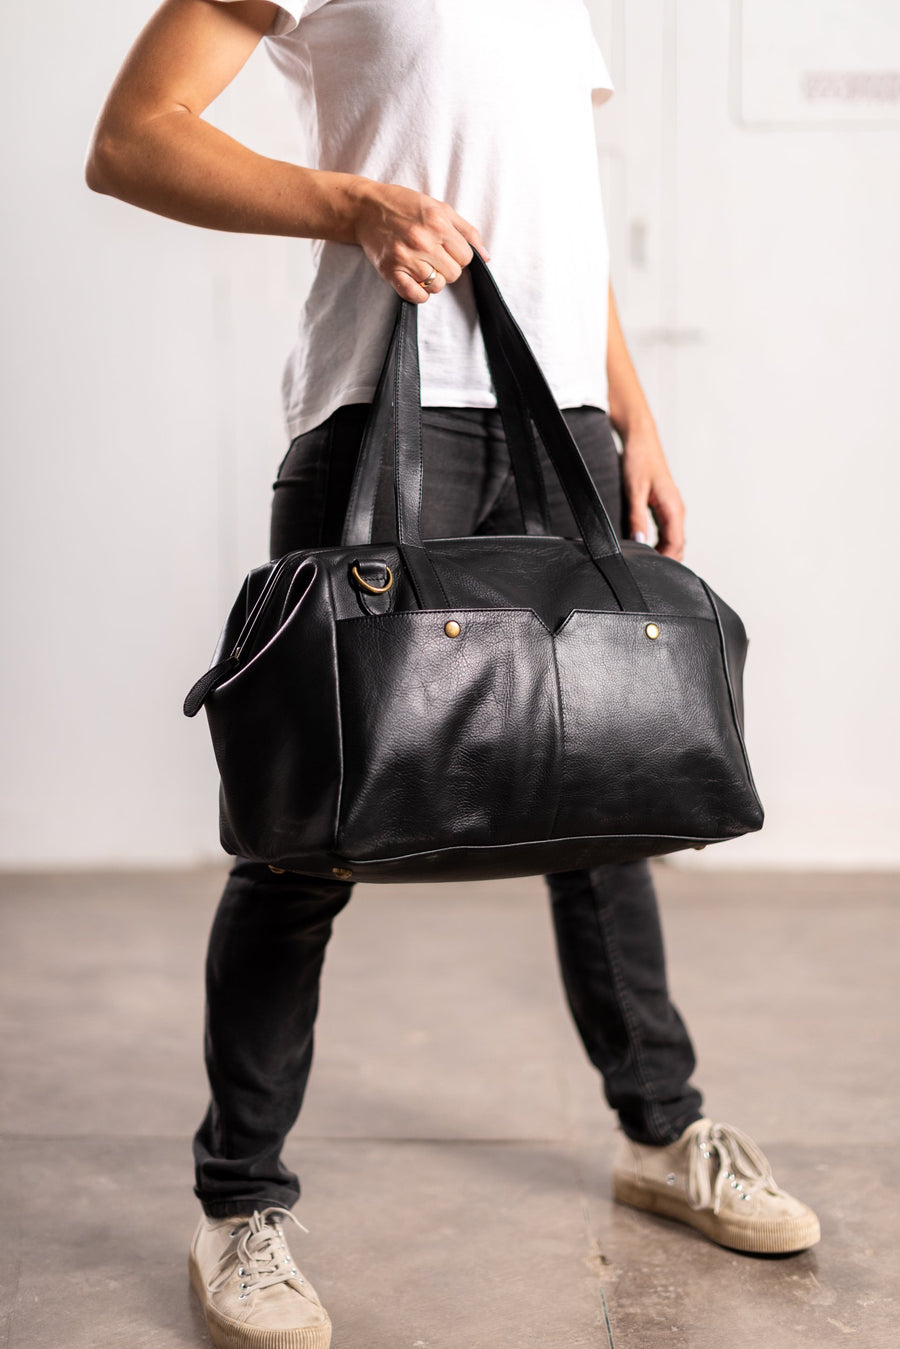 Leather Bags fair trade ethical sustainable fashion Black Leather 3 in 1 Weekender conscious purchase JOYN